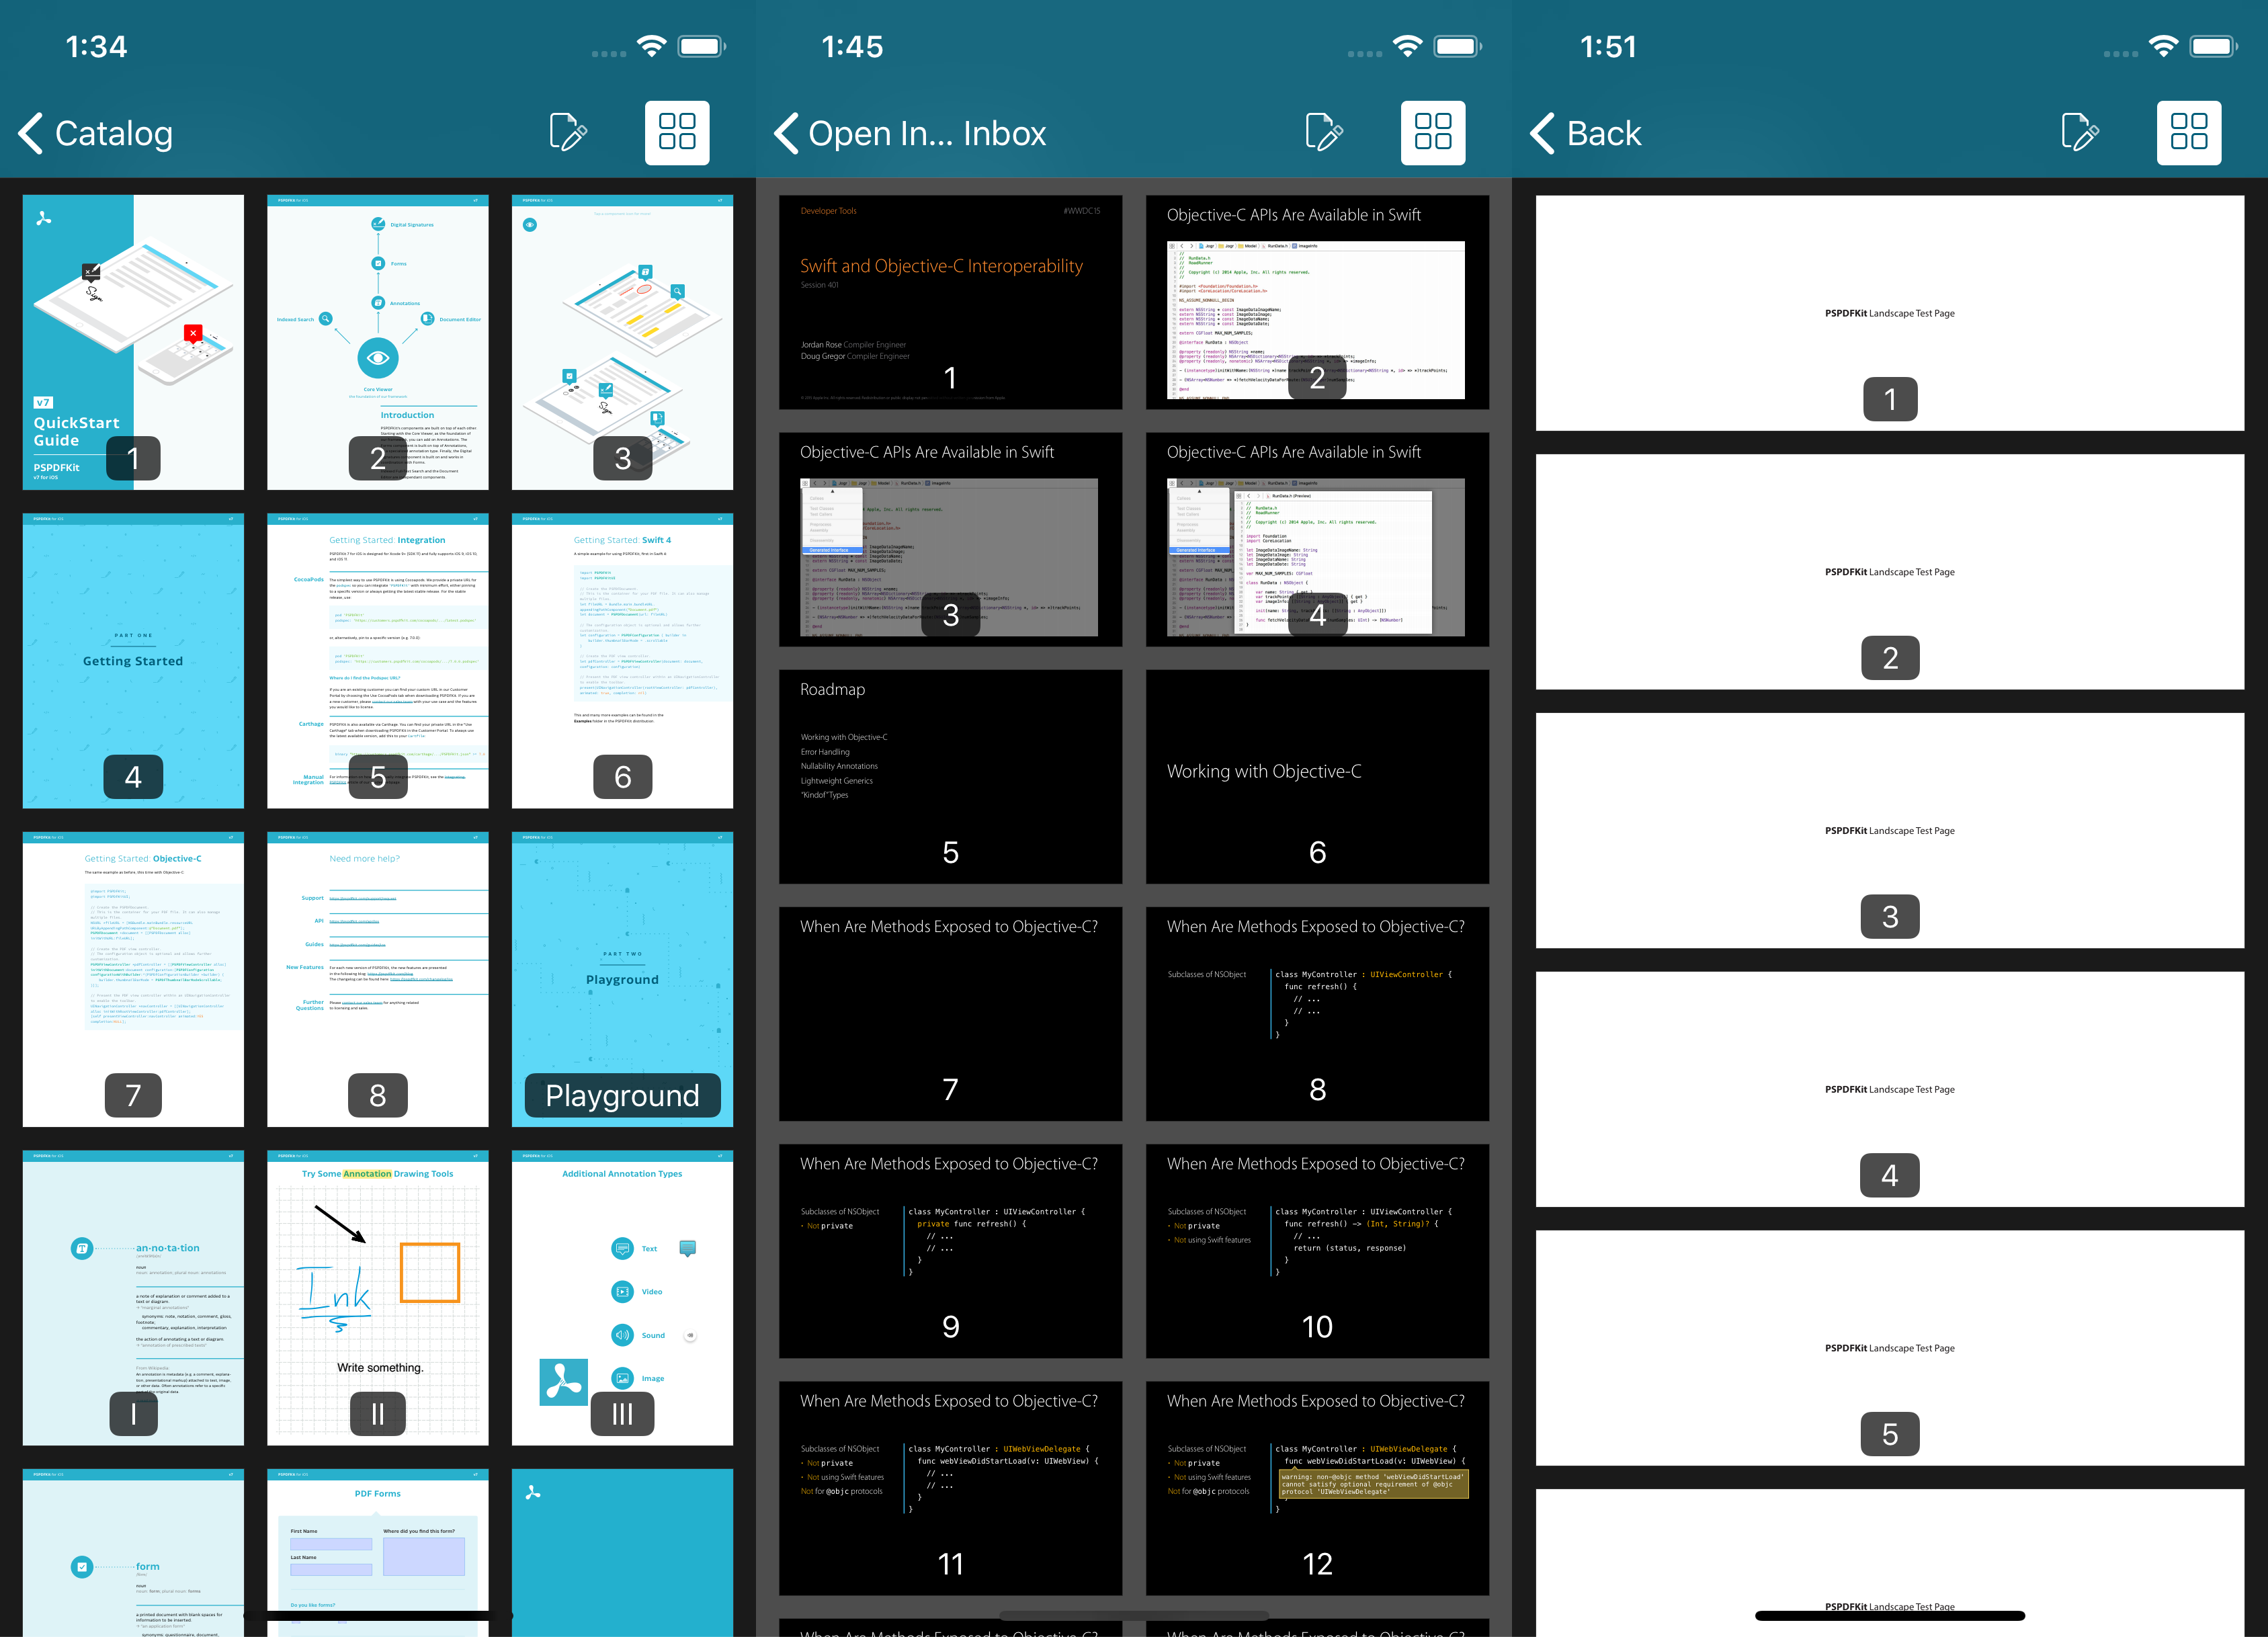 Thumbnails from three documents with different pages sizes, all fitting well on iPhone in portrait